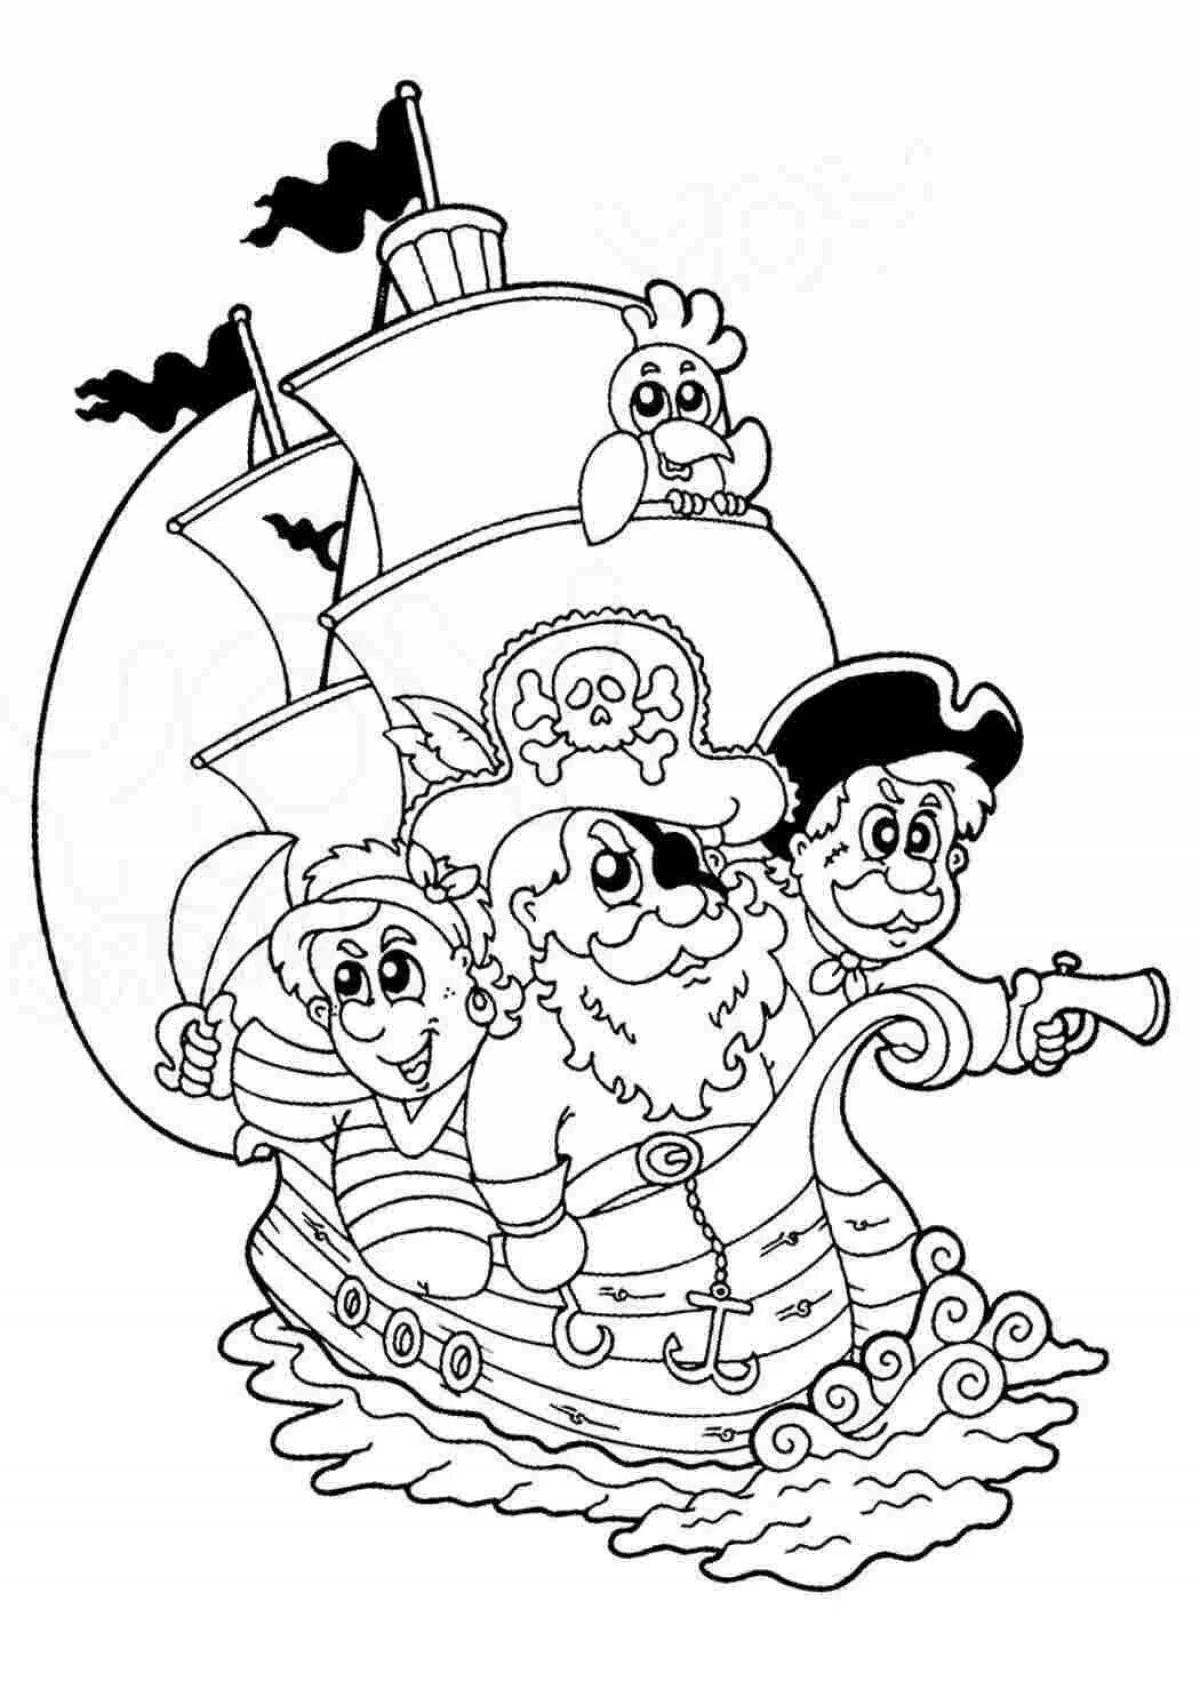 Adventurous pirate coloring book for kids